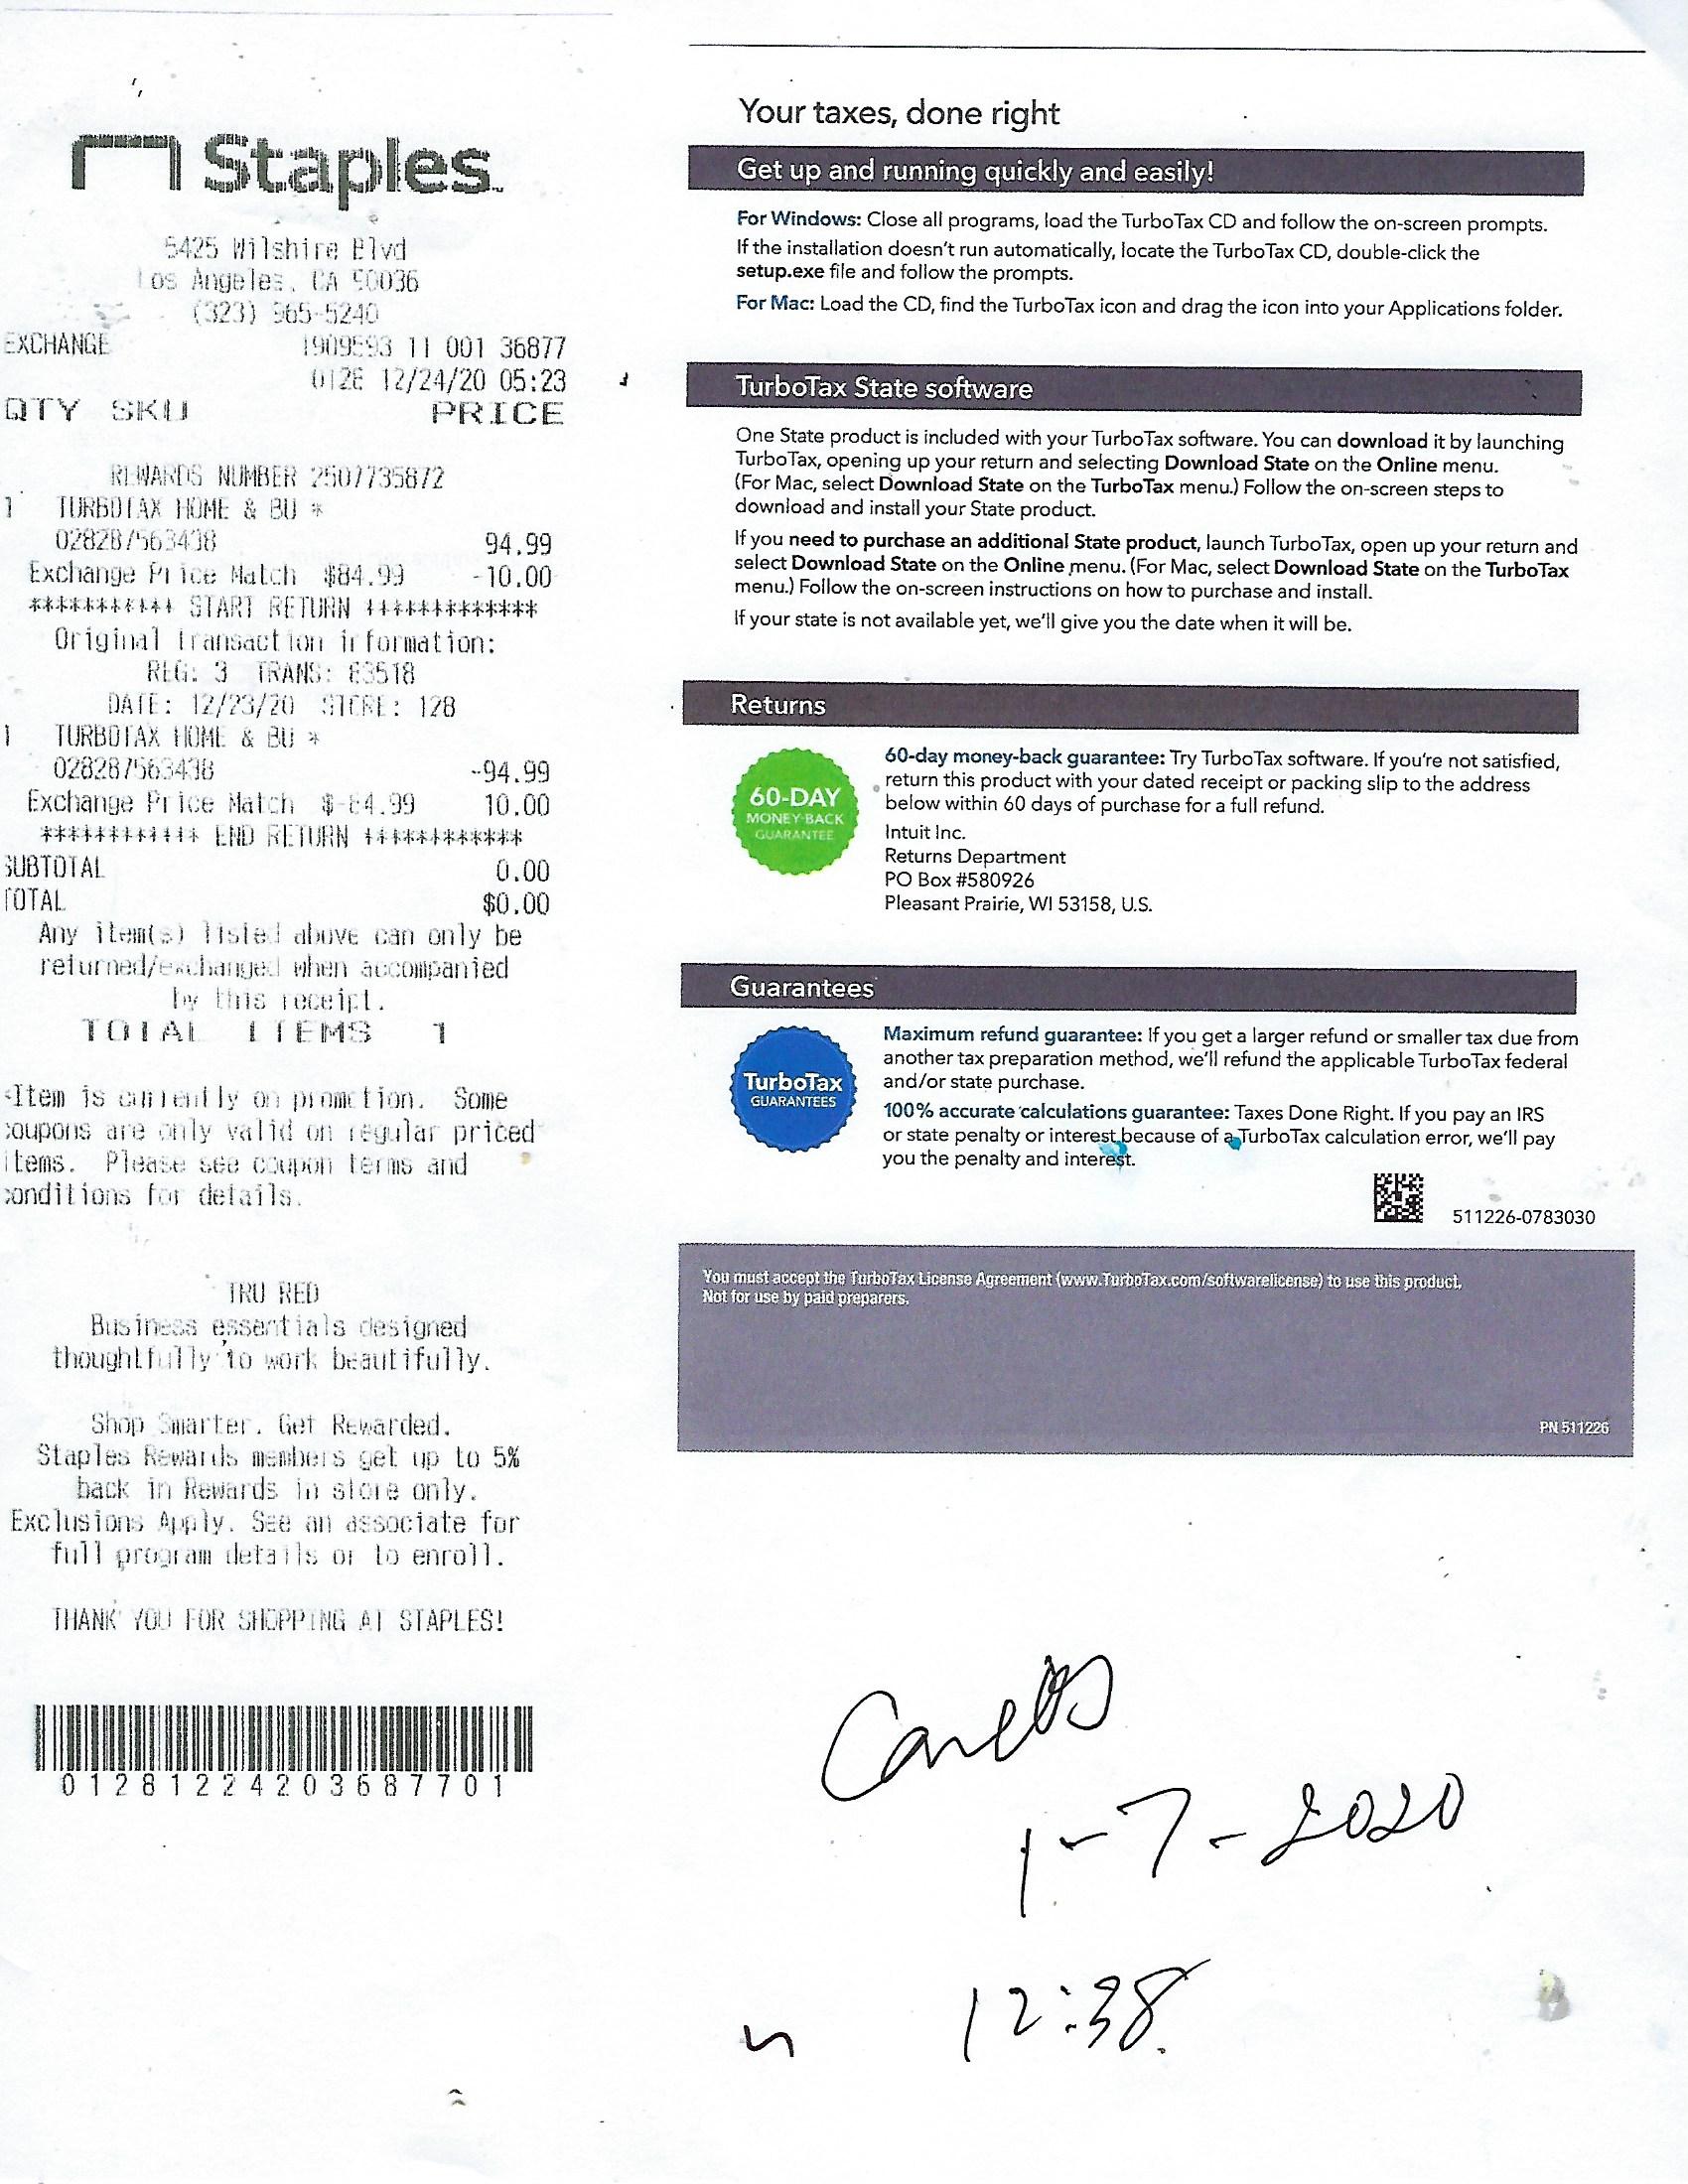 RECEIPT FROM STAPLES FOR PURCHASE ON 12-24-2020